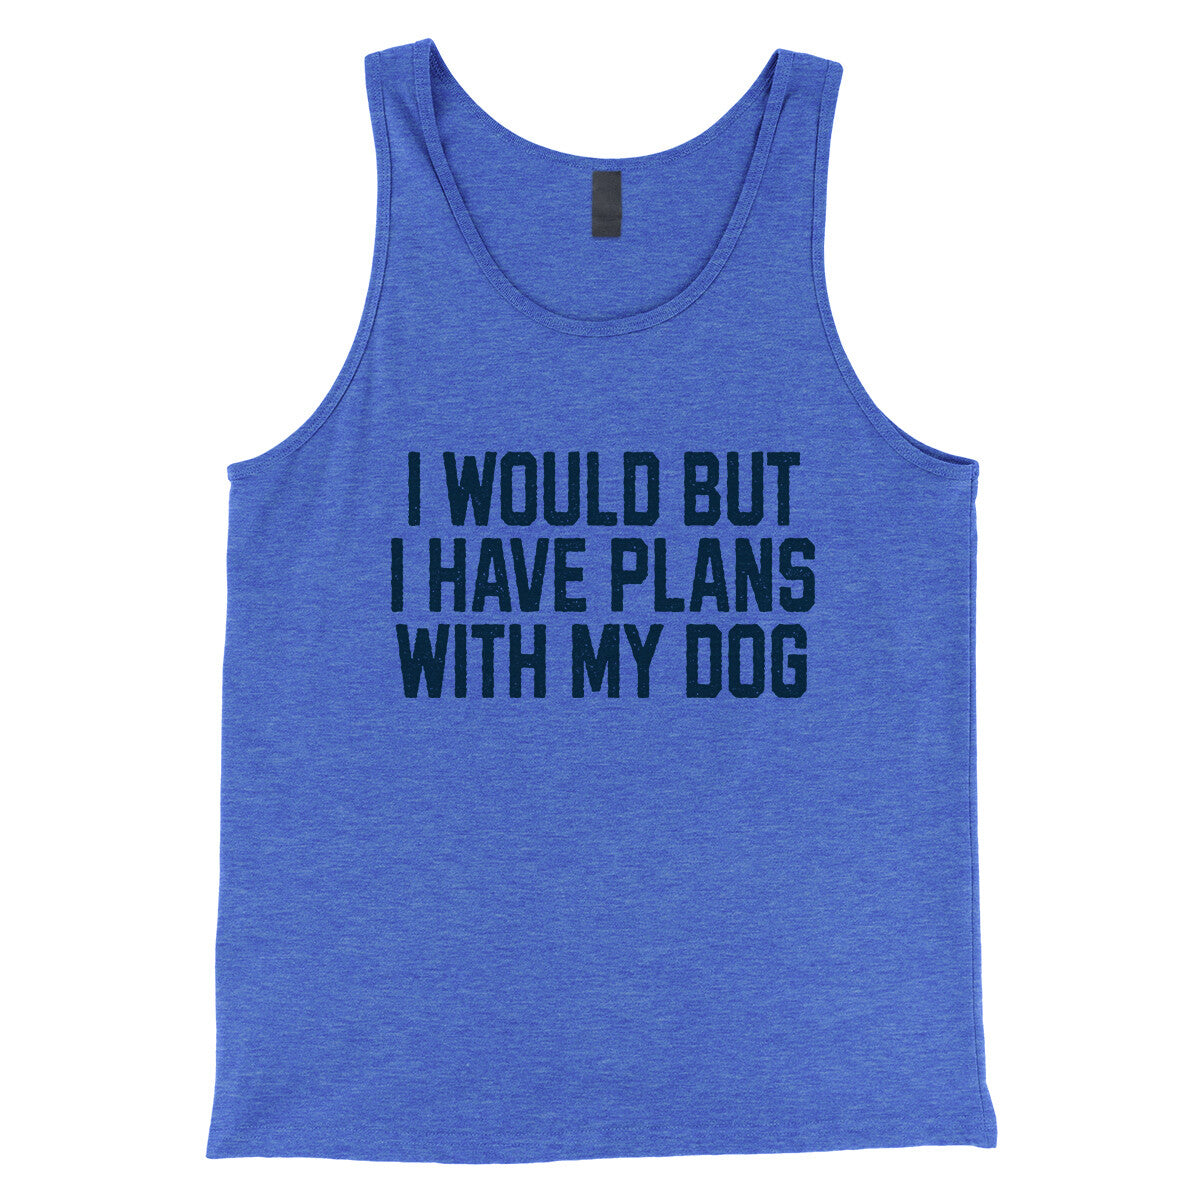 I Would but I Have Plans with My Dog in True Royal TriBlend Color